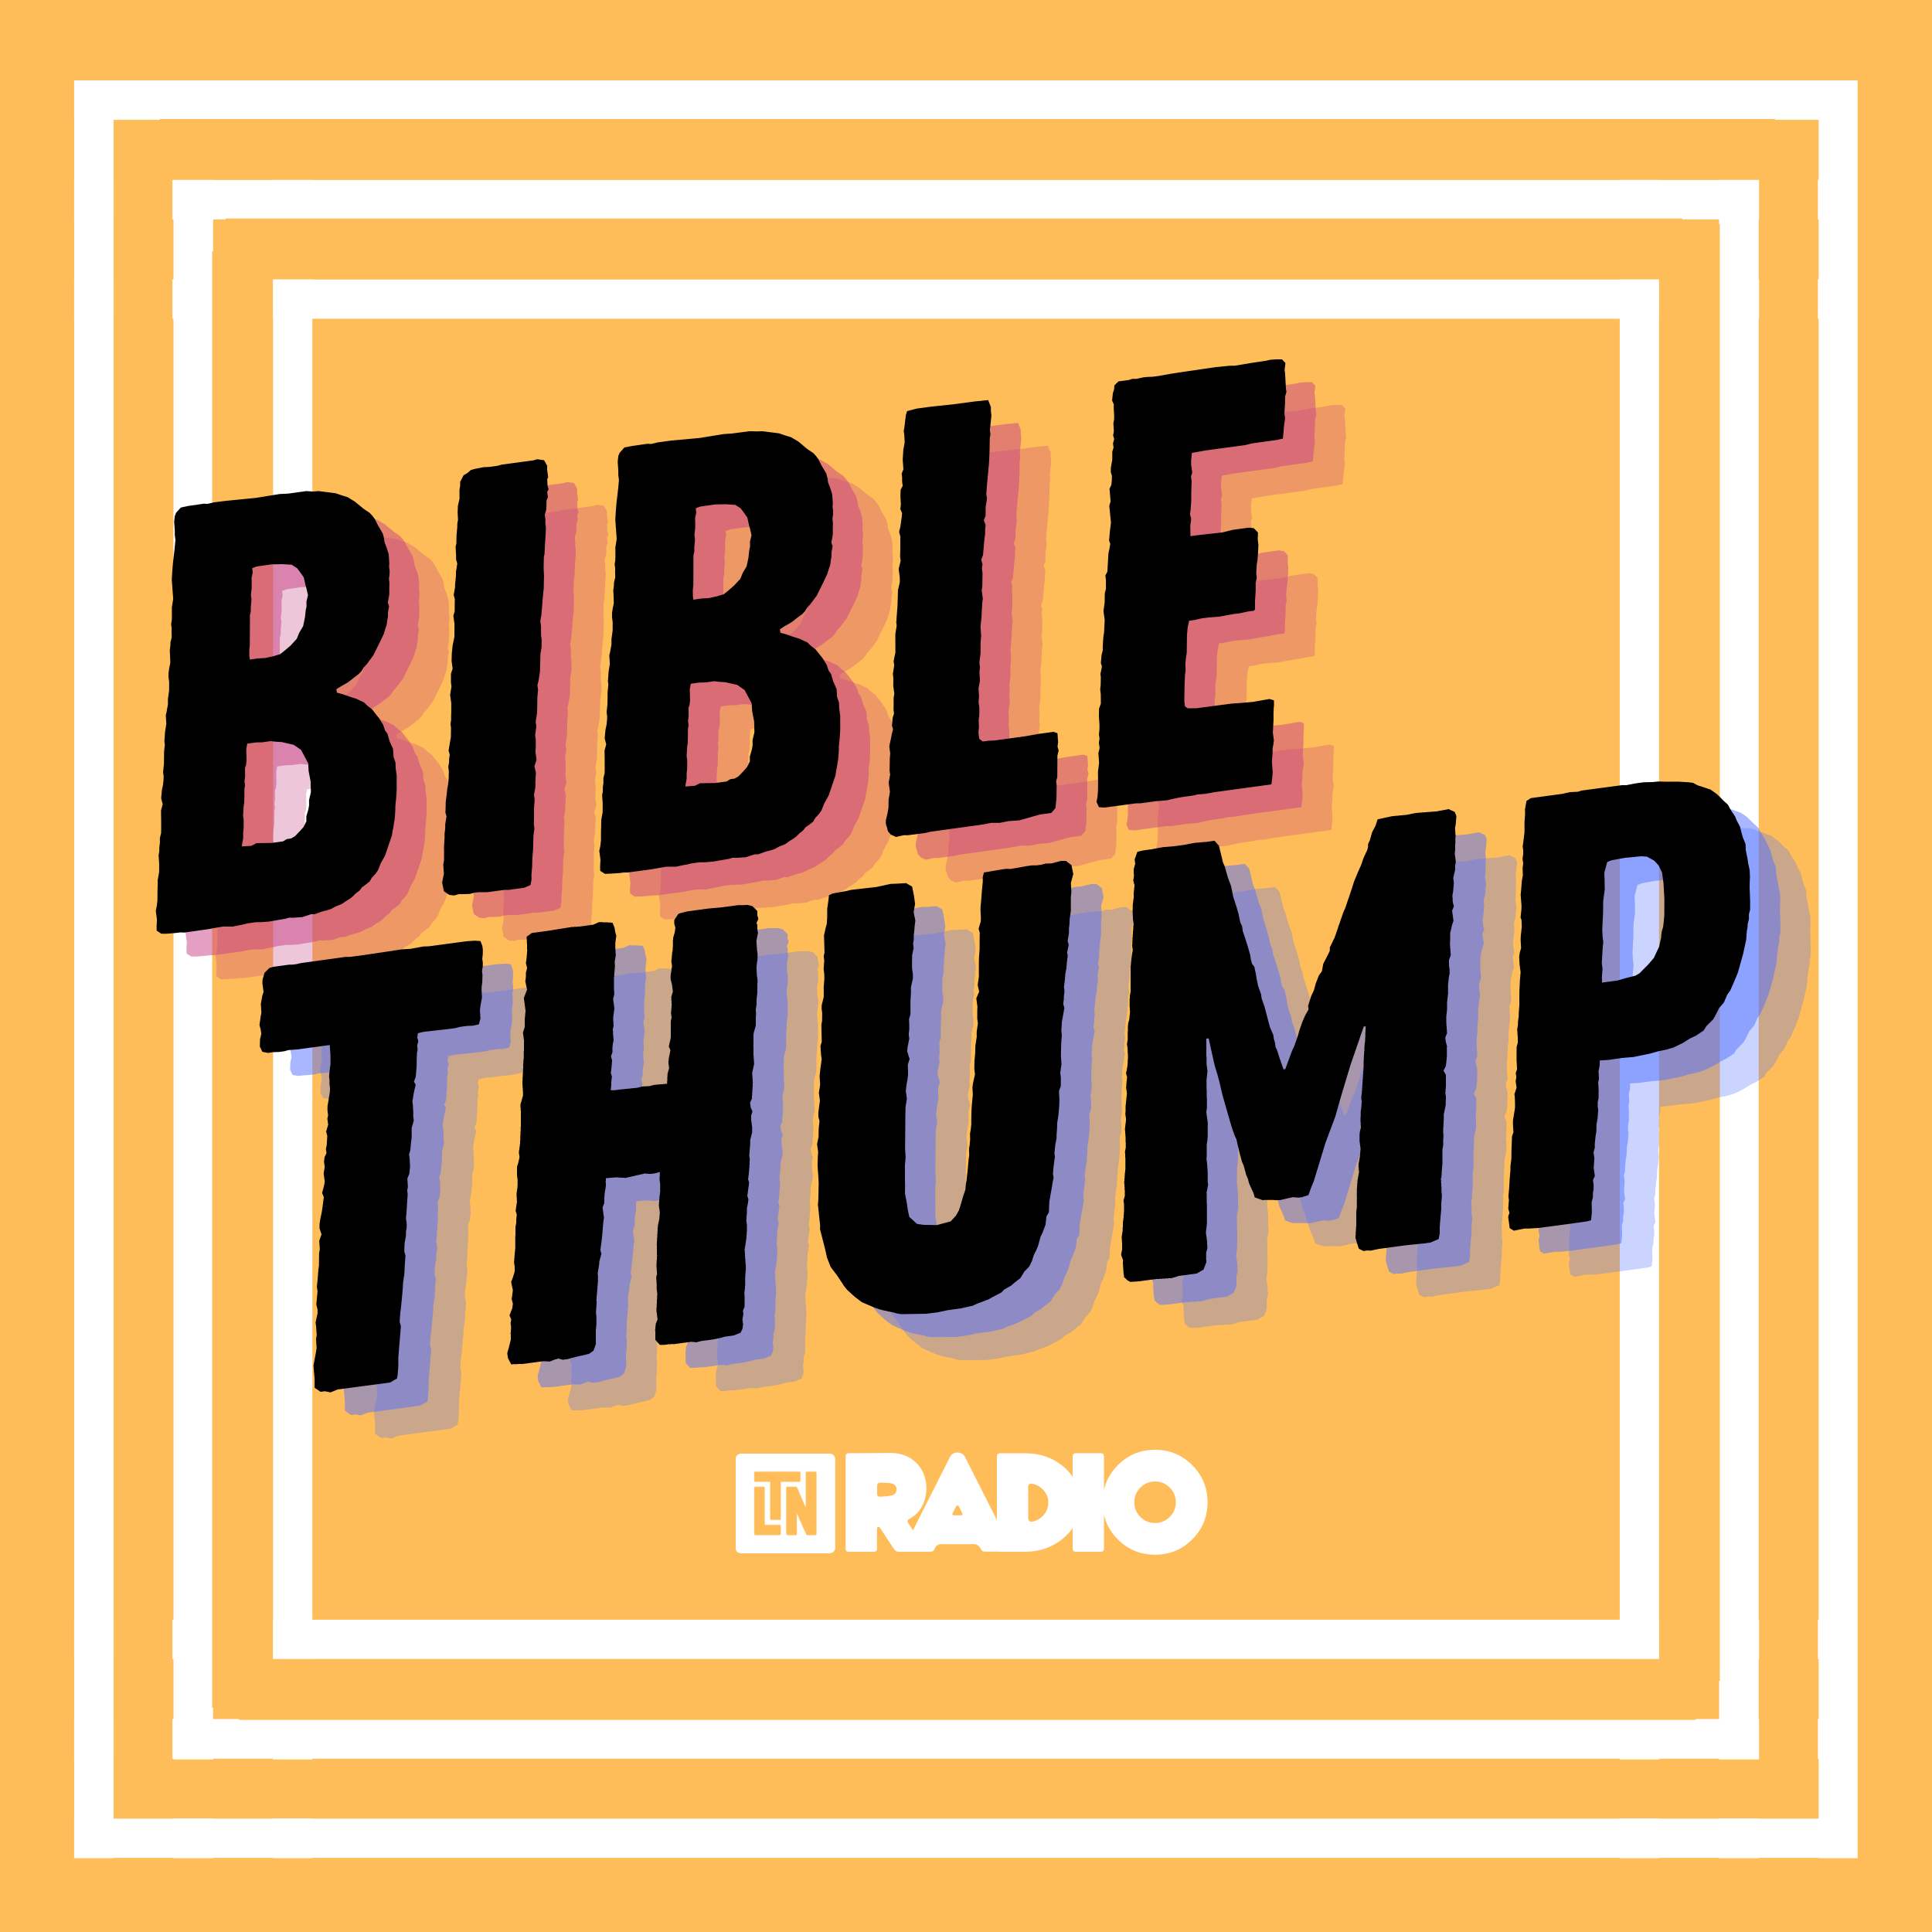 Bible Thump | The Full Distance